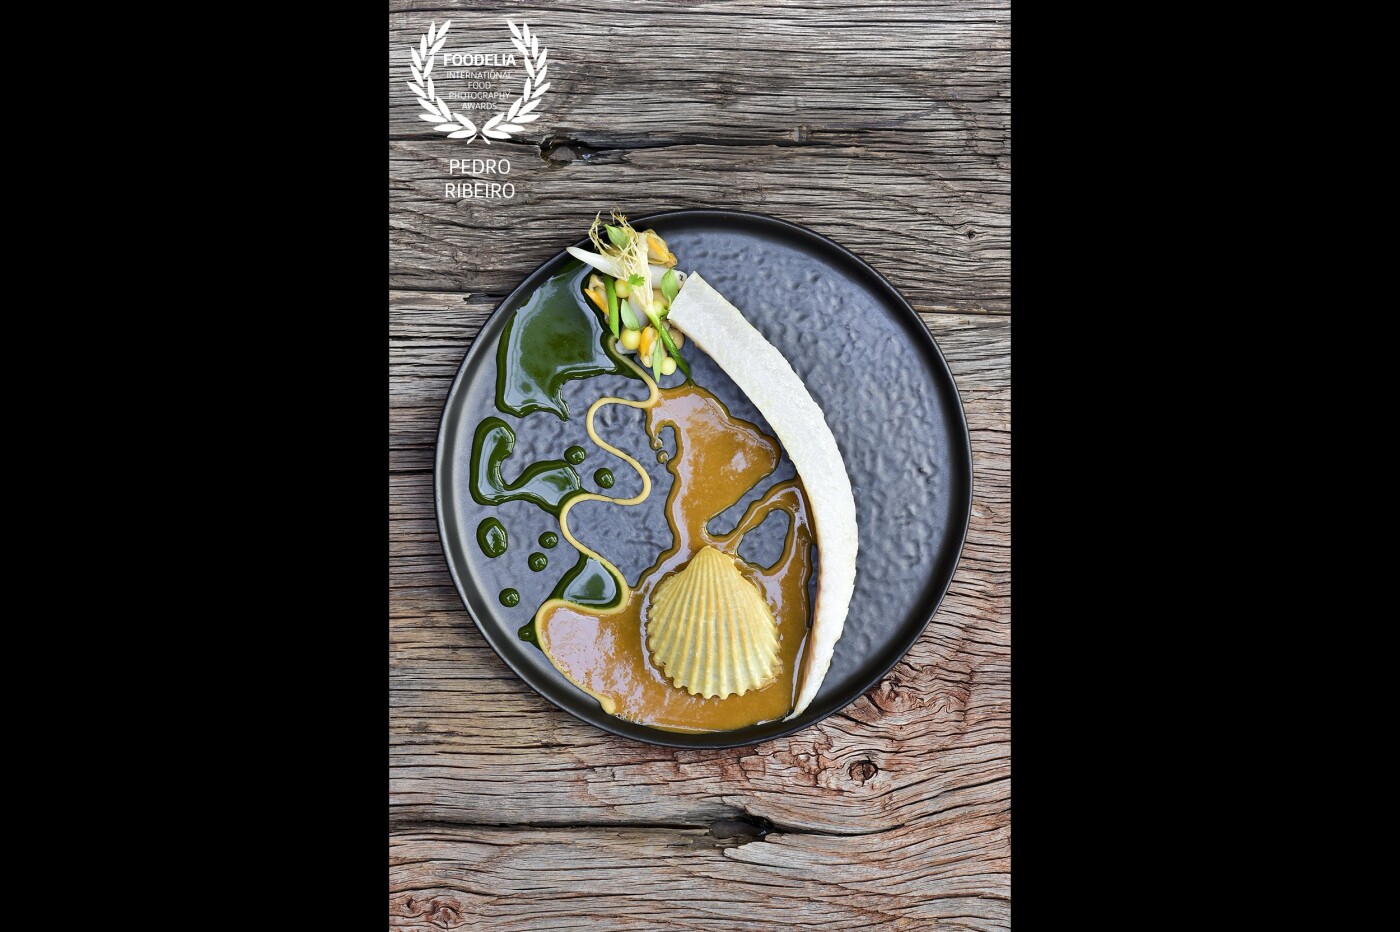 This image was made while visiting the one star Michelin restaurant Fortaleza do Guincho in Cascais, Portugal.<br />
This menu with sea inspiration was created by Executive chef Gil Fernandes.<br />
